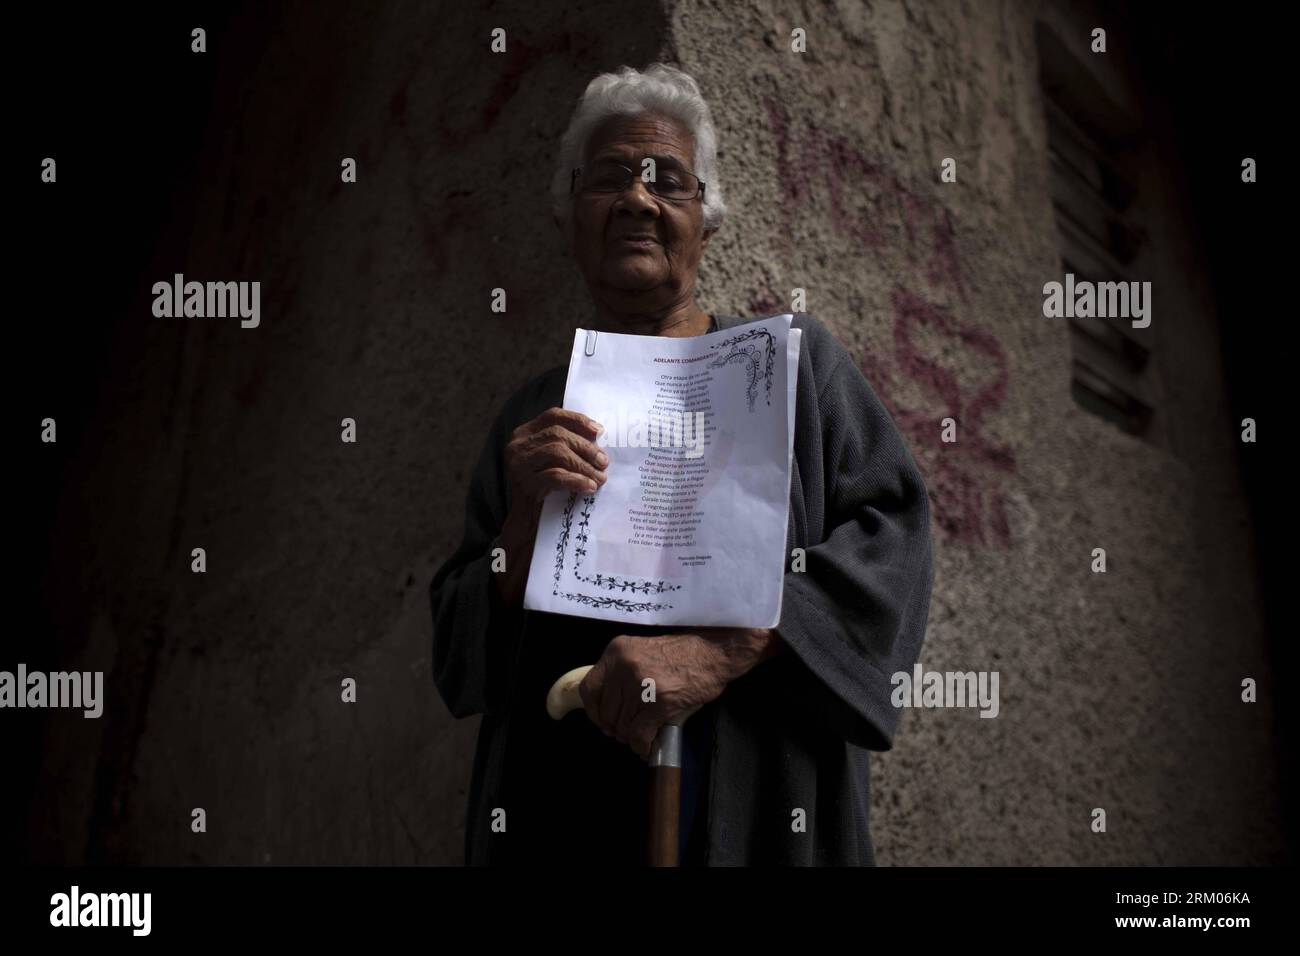 Bildnummer: 59332272  Datum: 10.03.2013  Copyright: imago/Xinhua The poet and writer Pascuala Delgado, 74 years old, shows one of his works devoted to deceased Venezuelan President, Hugo Chavez at home in Caracas, capital of Venezuela, March 10, 2013. Pascuala Delgado was intimidated by her works in more than 7 times by the government of Carlos Andres Perez. (Xinhua/David de la Paz)(zhf) VENEZUELA-CARACAS-CHAVEZ-PROGRAM BENEFICIARY PUBLICATIONxNOTxINxCHN Gesellschaft Land Leute Venezuela Gedenken Politik premiumd x2x xmb 2013 quer o0 Anhänger Anhängerin Zensur Zensuropfer Schriftstelletin Dich Stock Photo